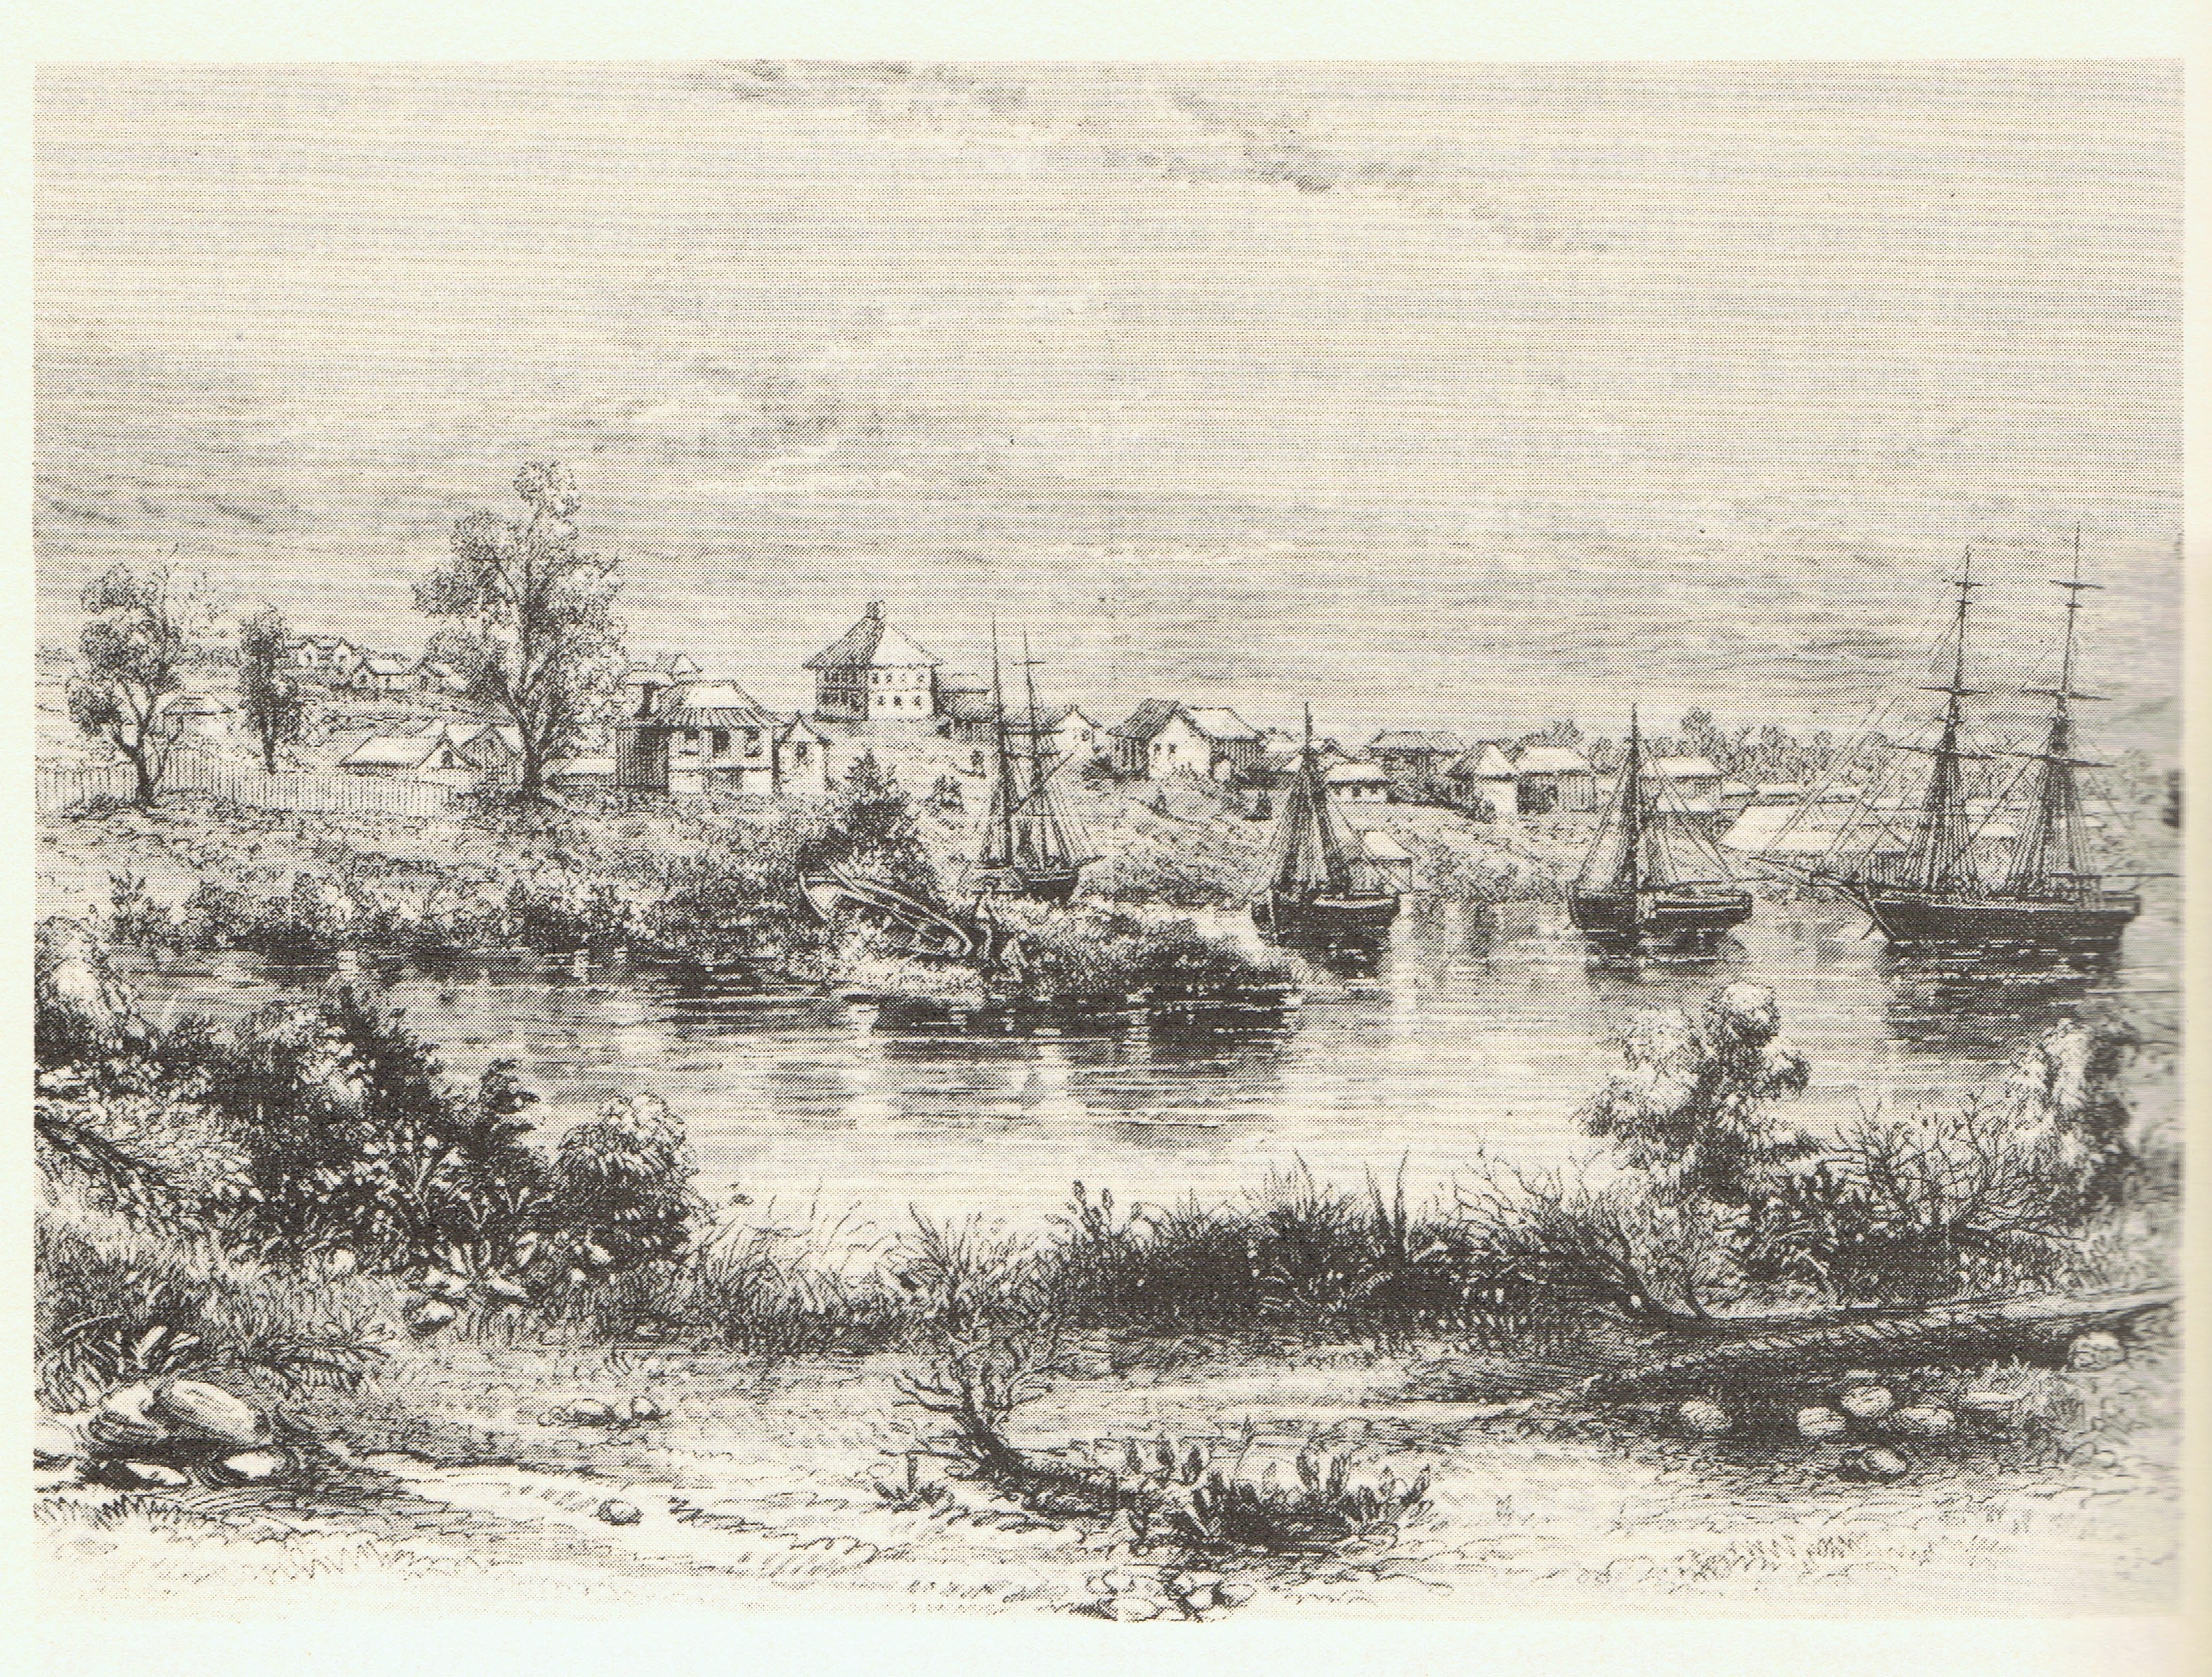 Melbourne in 1840:  from the original sketch by Mr. G. H. Haydon